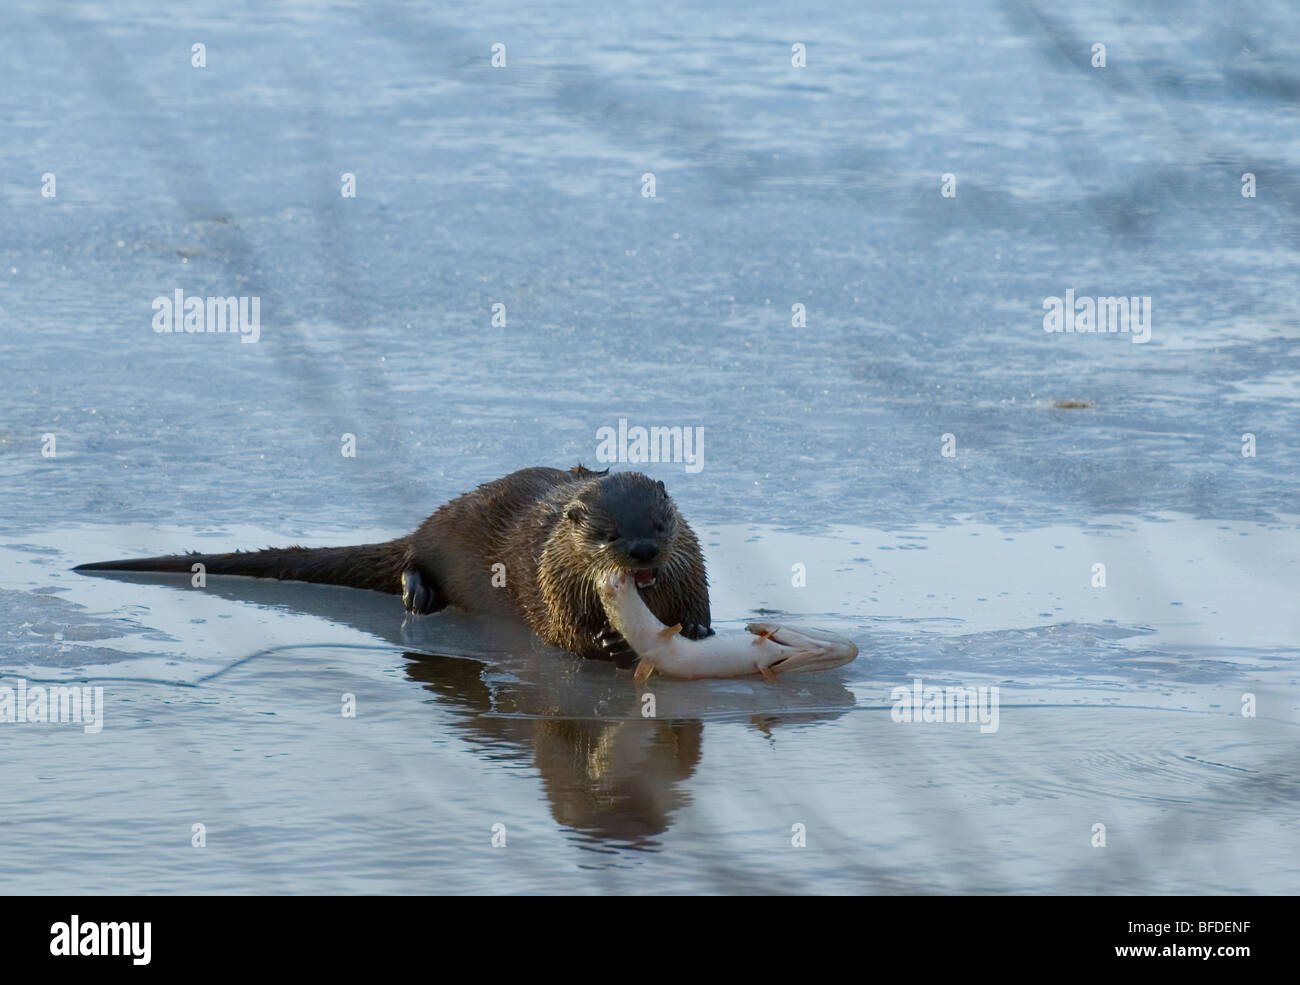 North American river otter (Lontra canadensis) eating Northern pike (Esox lucius), Waterton Lakes National Park, Alberta, Canada Stock Photo